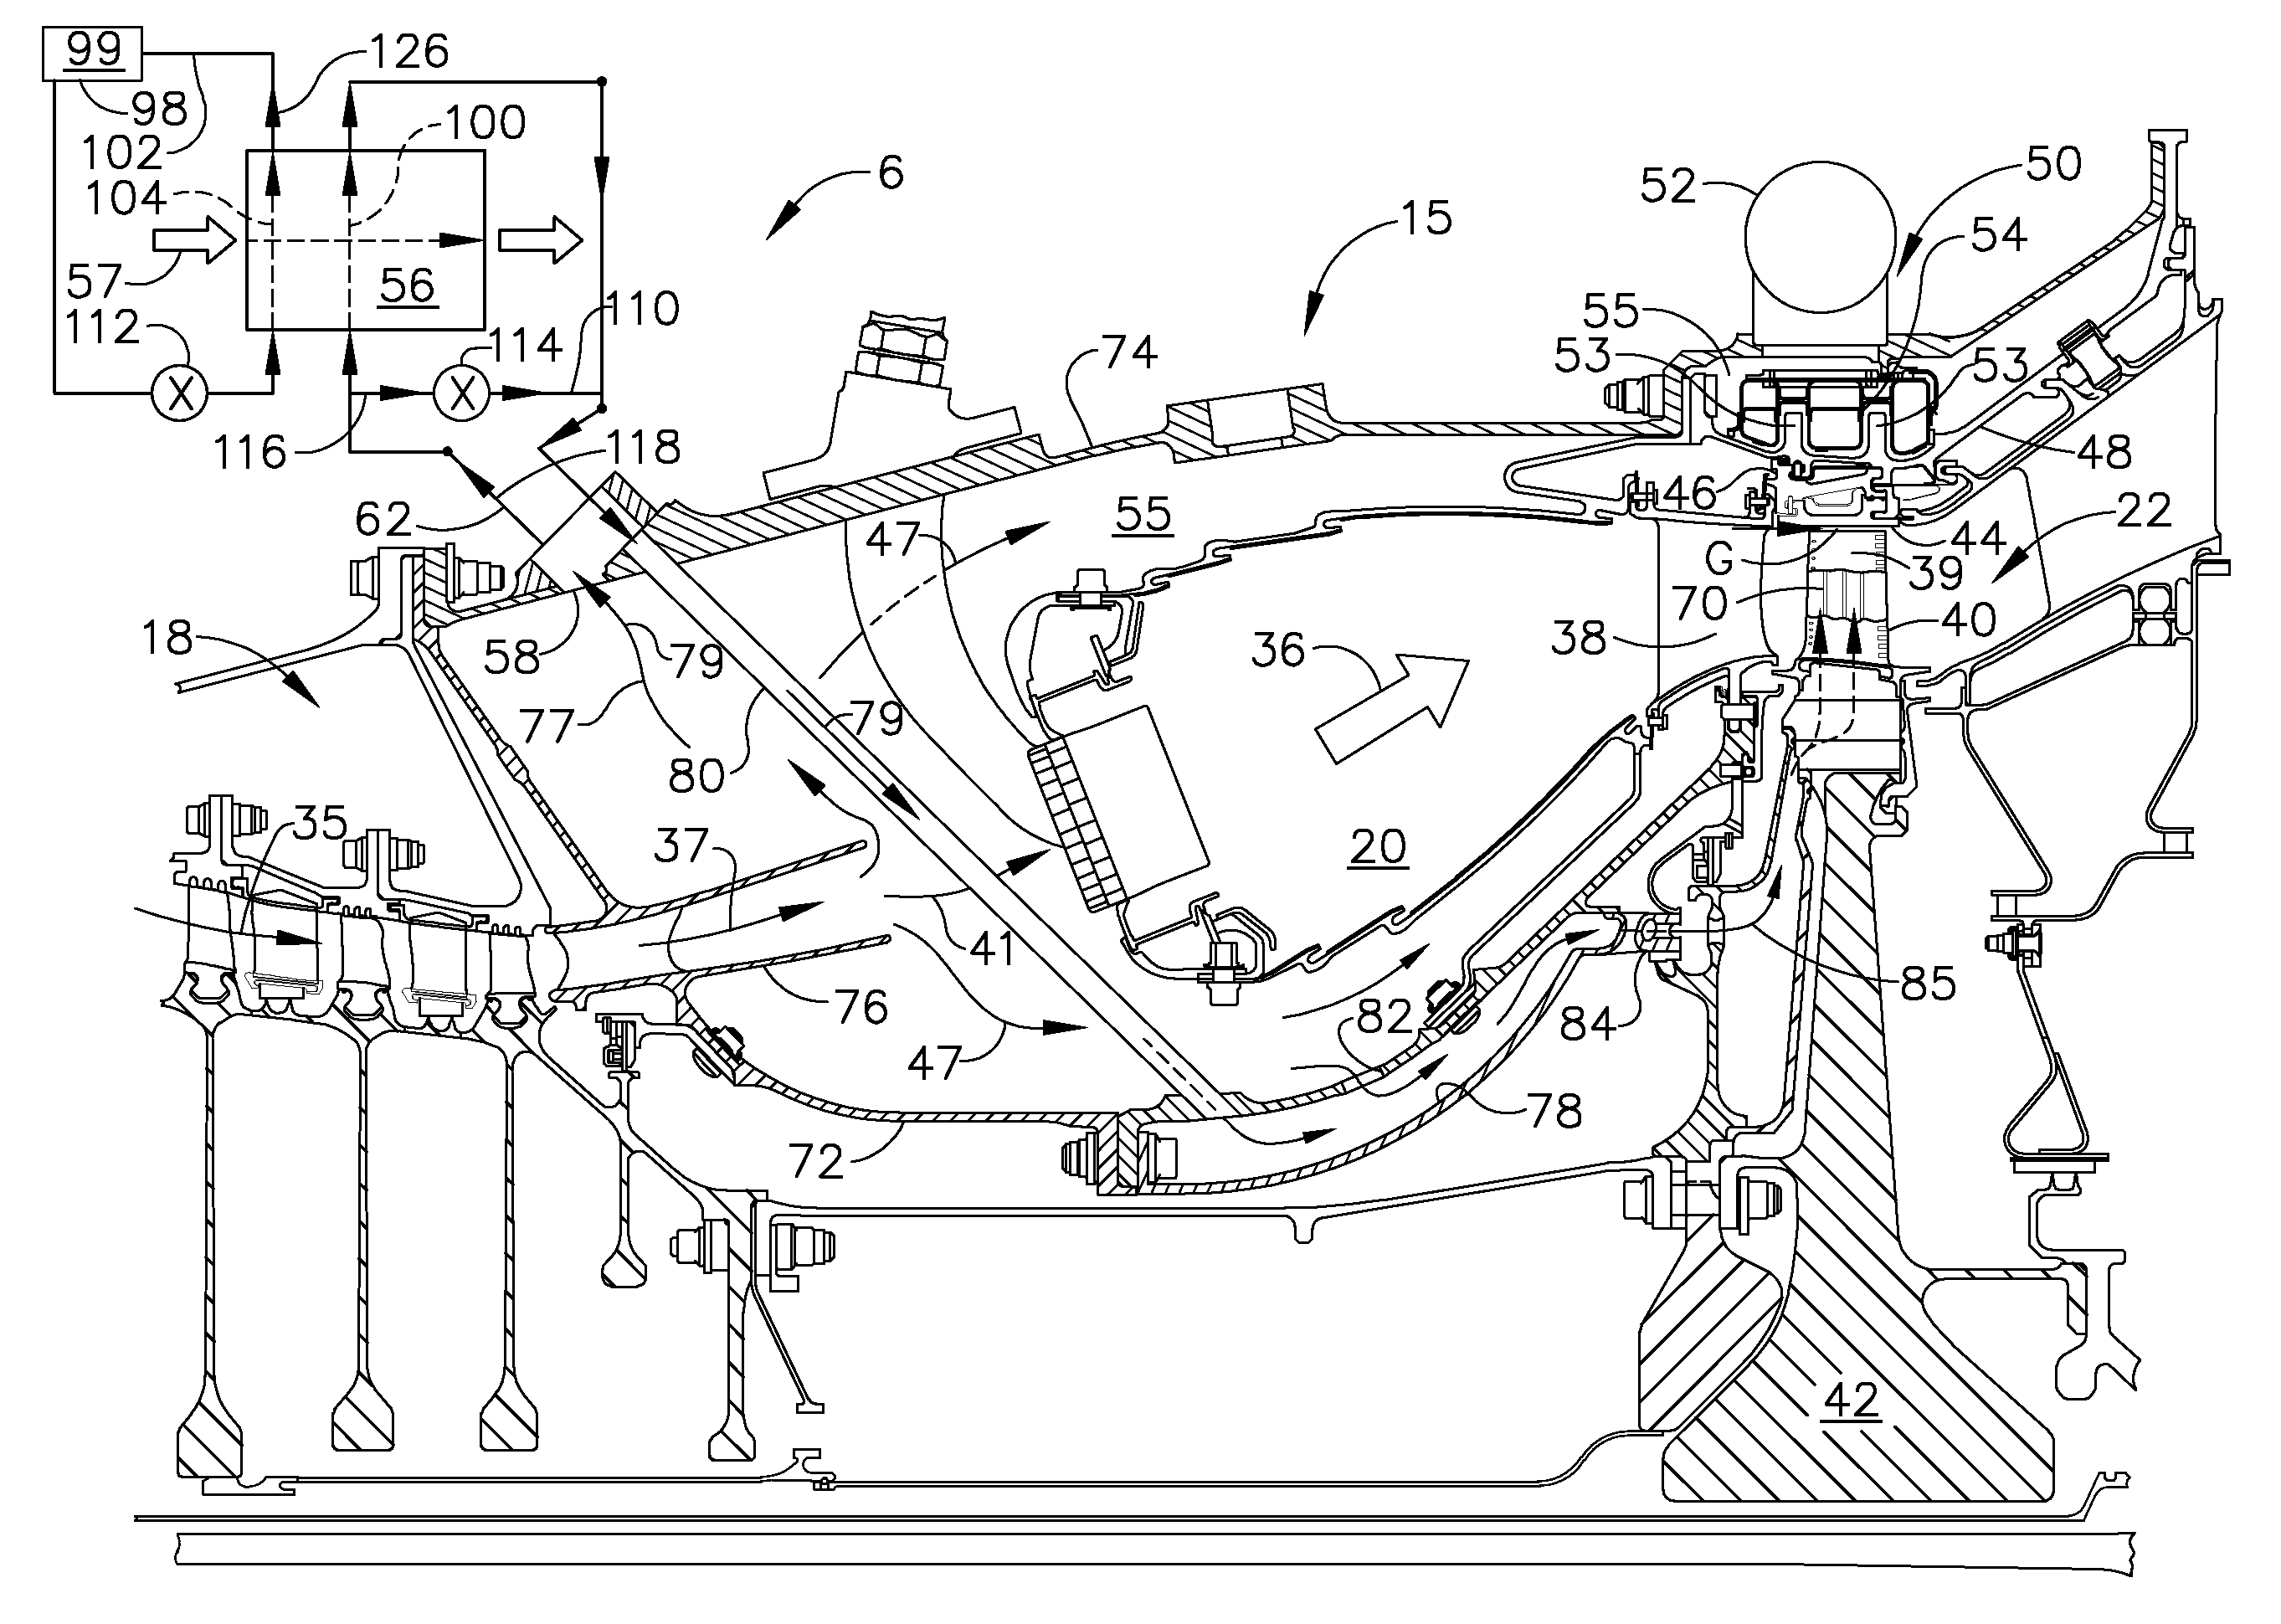 Gas turbine engine temperature modulated cooling flow